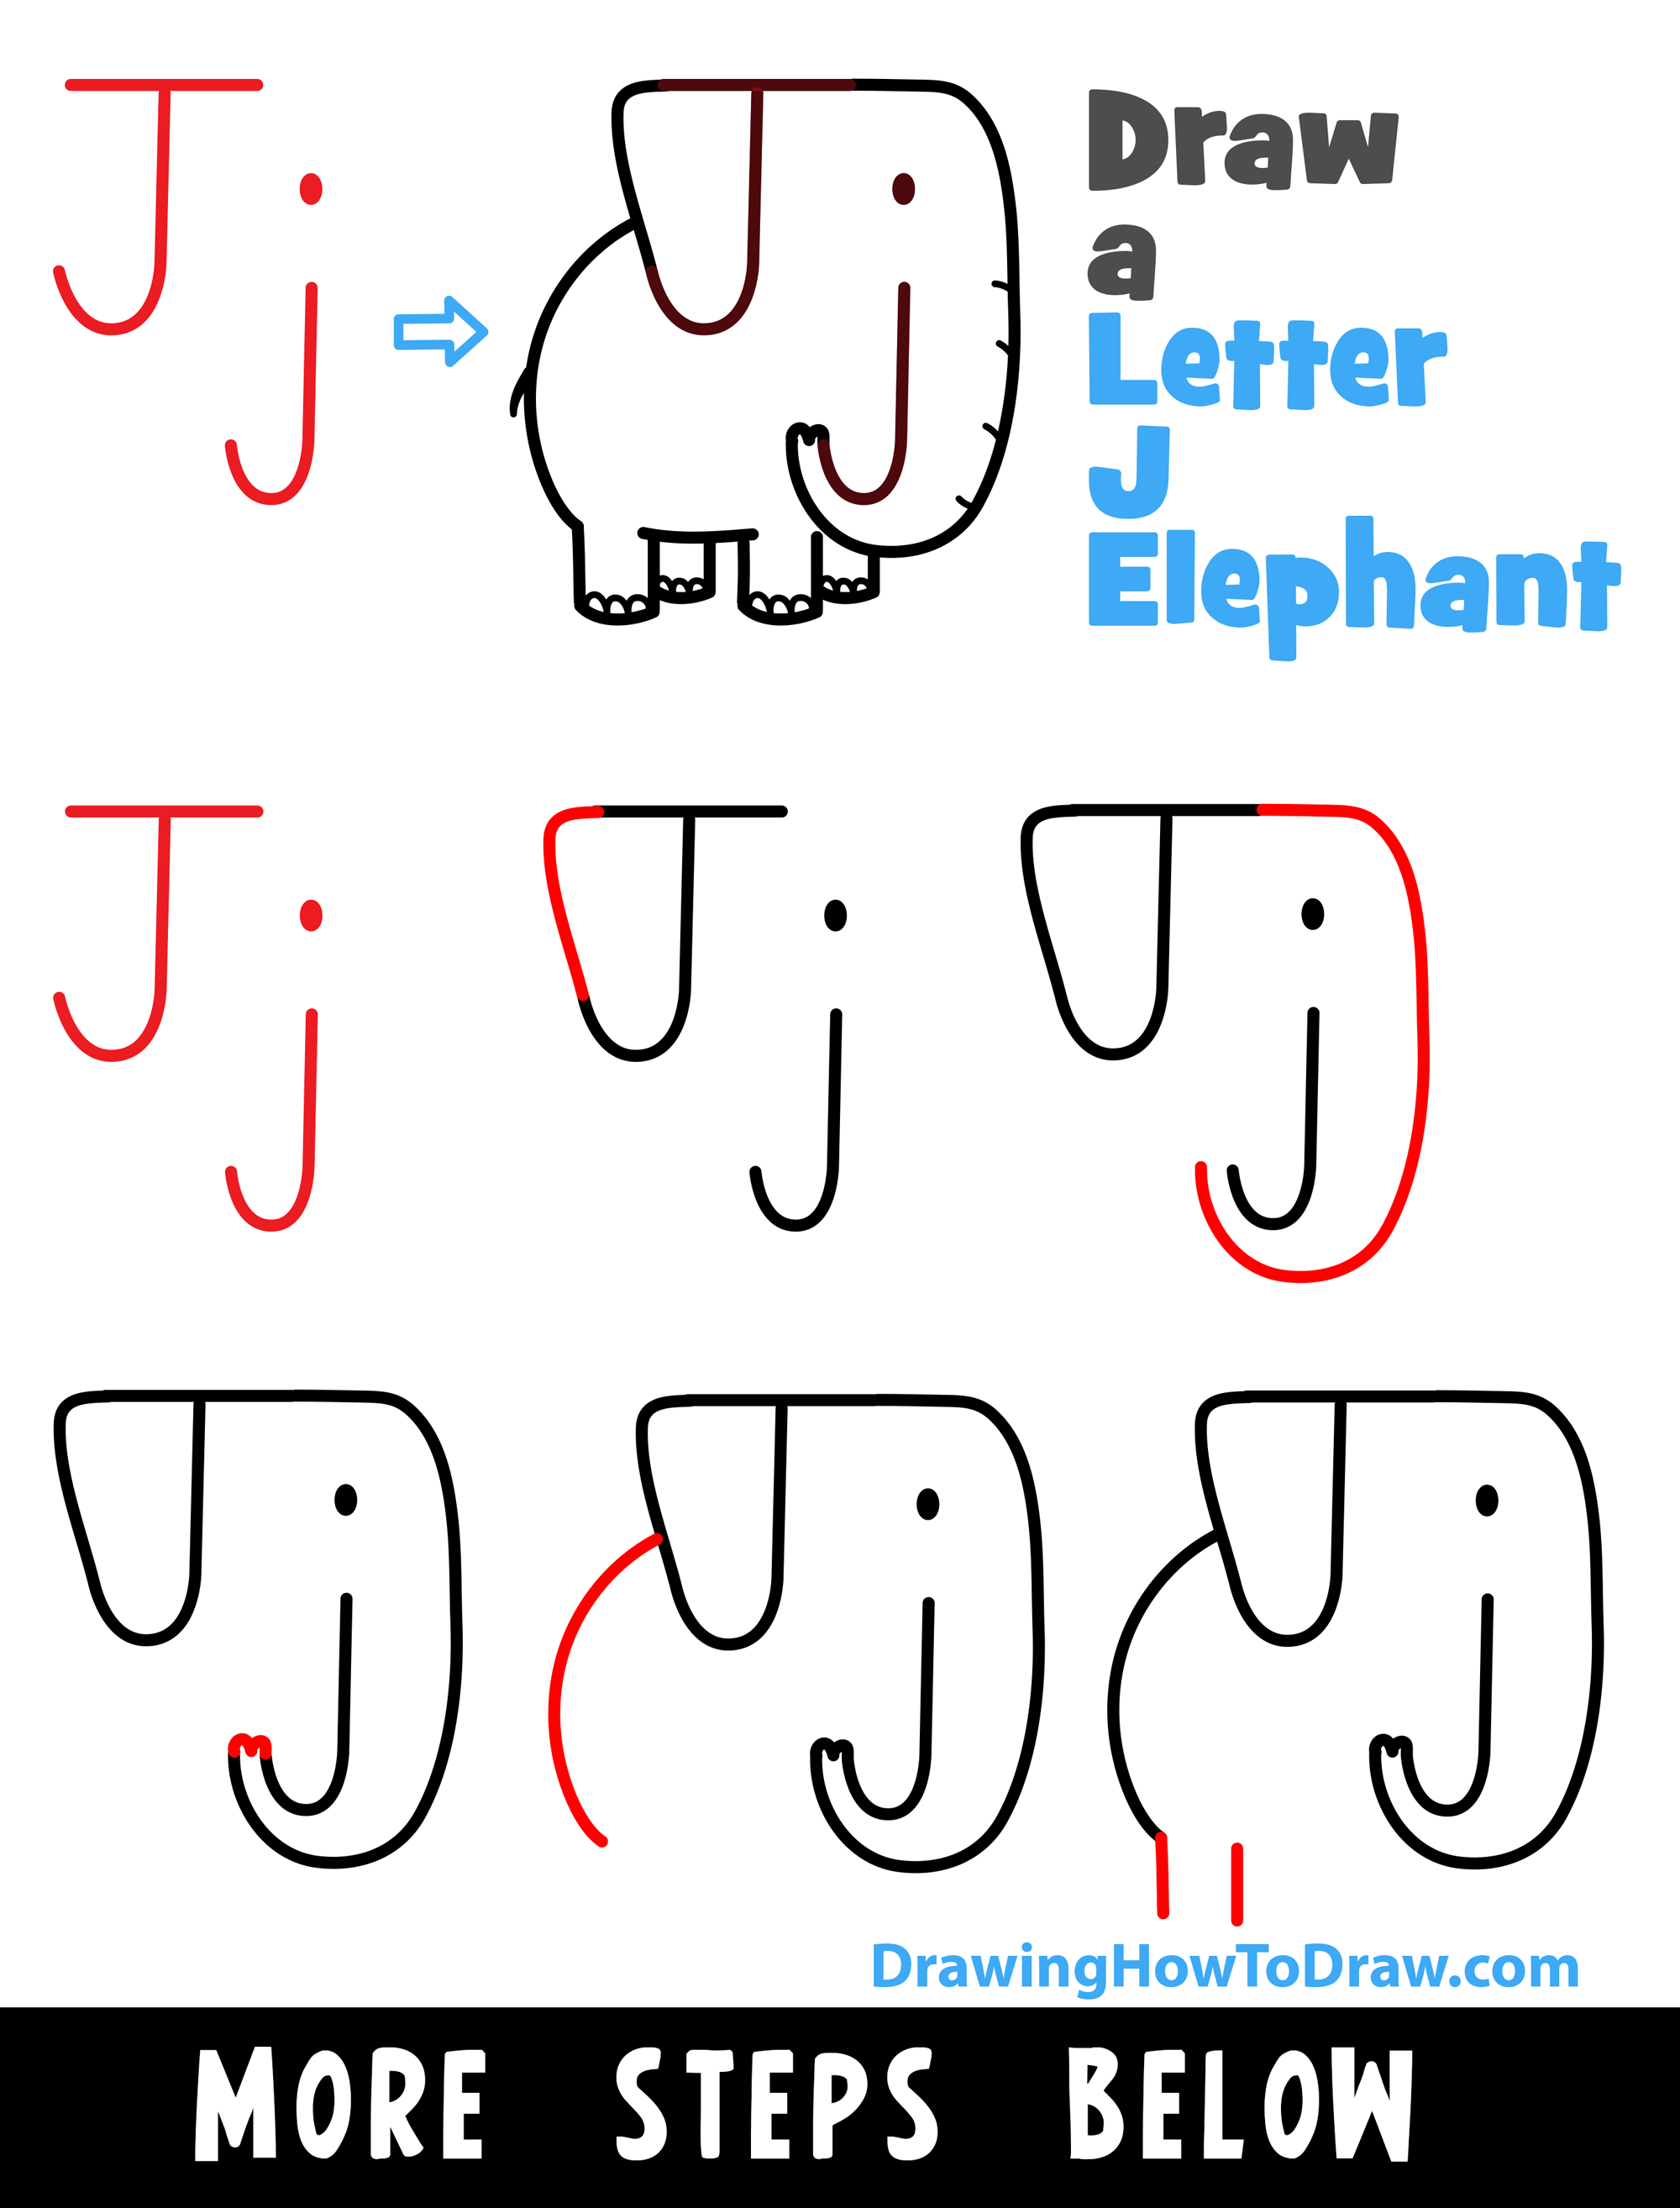 How to  Draw a Cartoon Elephant with Letter J Shapes - Easy Step-by-Step Drawing Tutorial for Kids